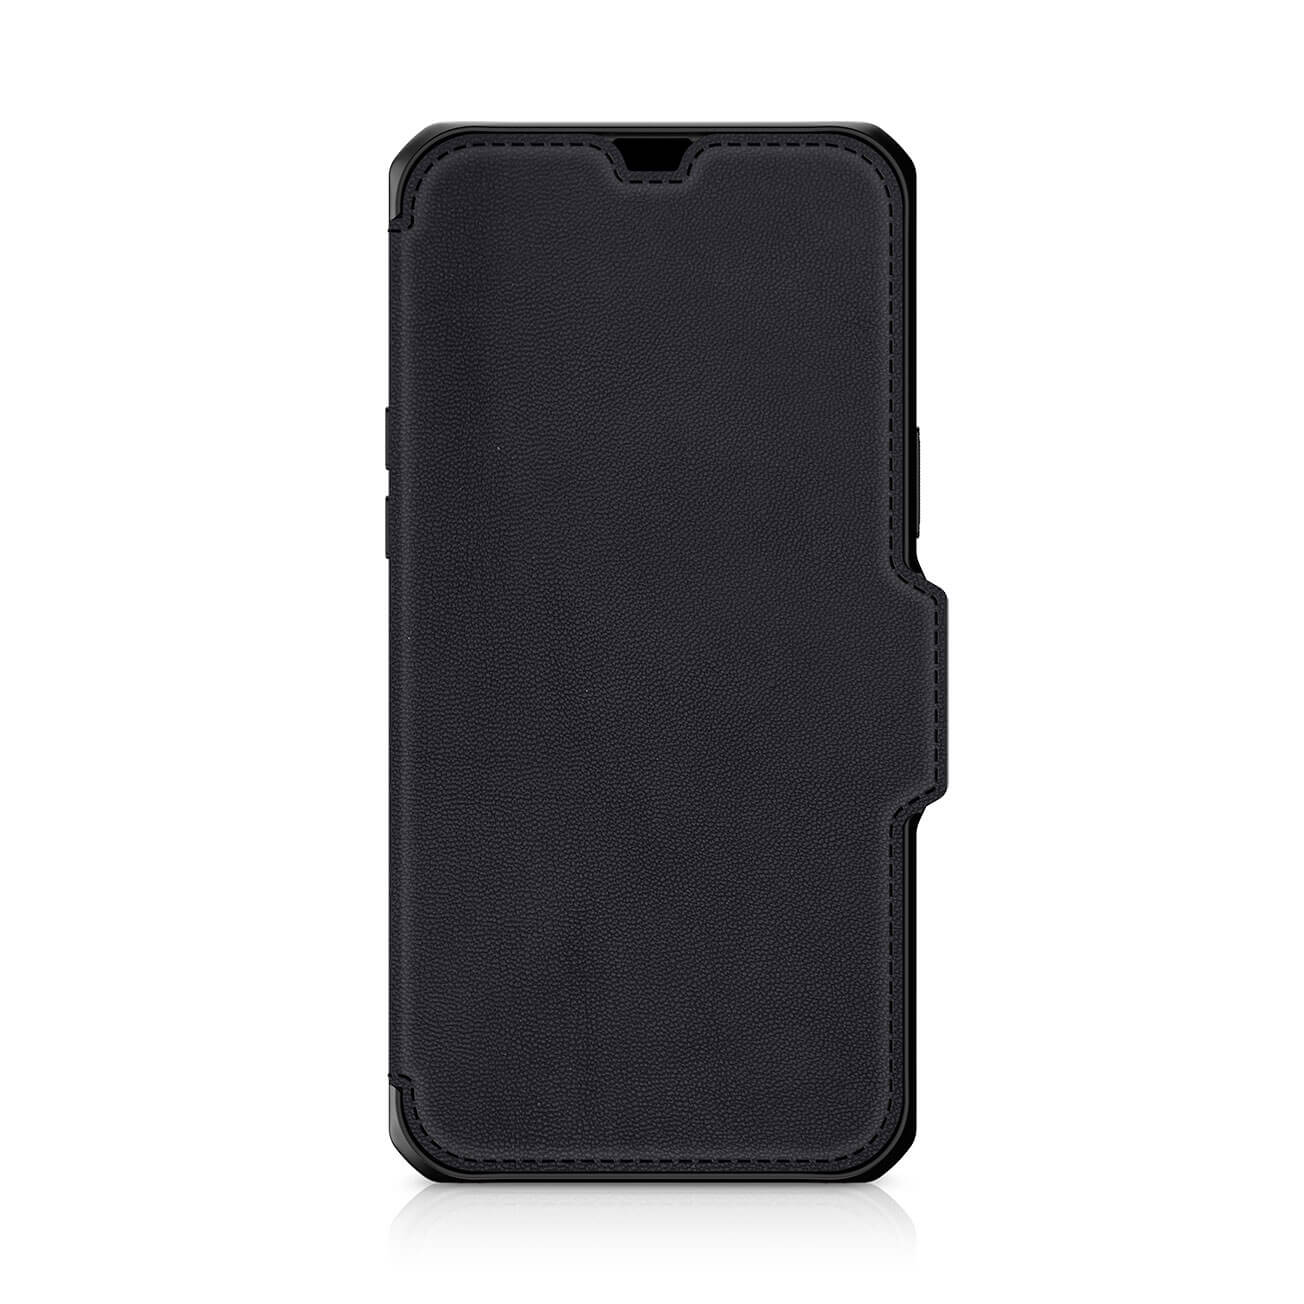 ITSKINS - Hybrid Folio Leather for iPhone 13 [ Black with real leather ]